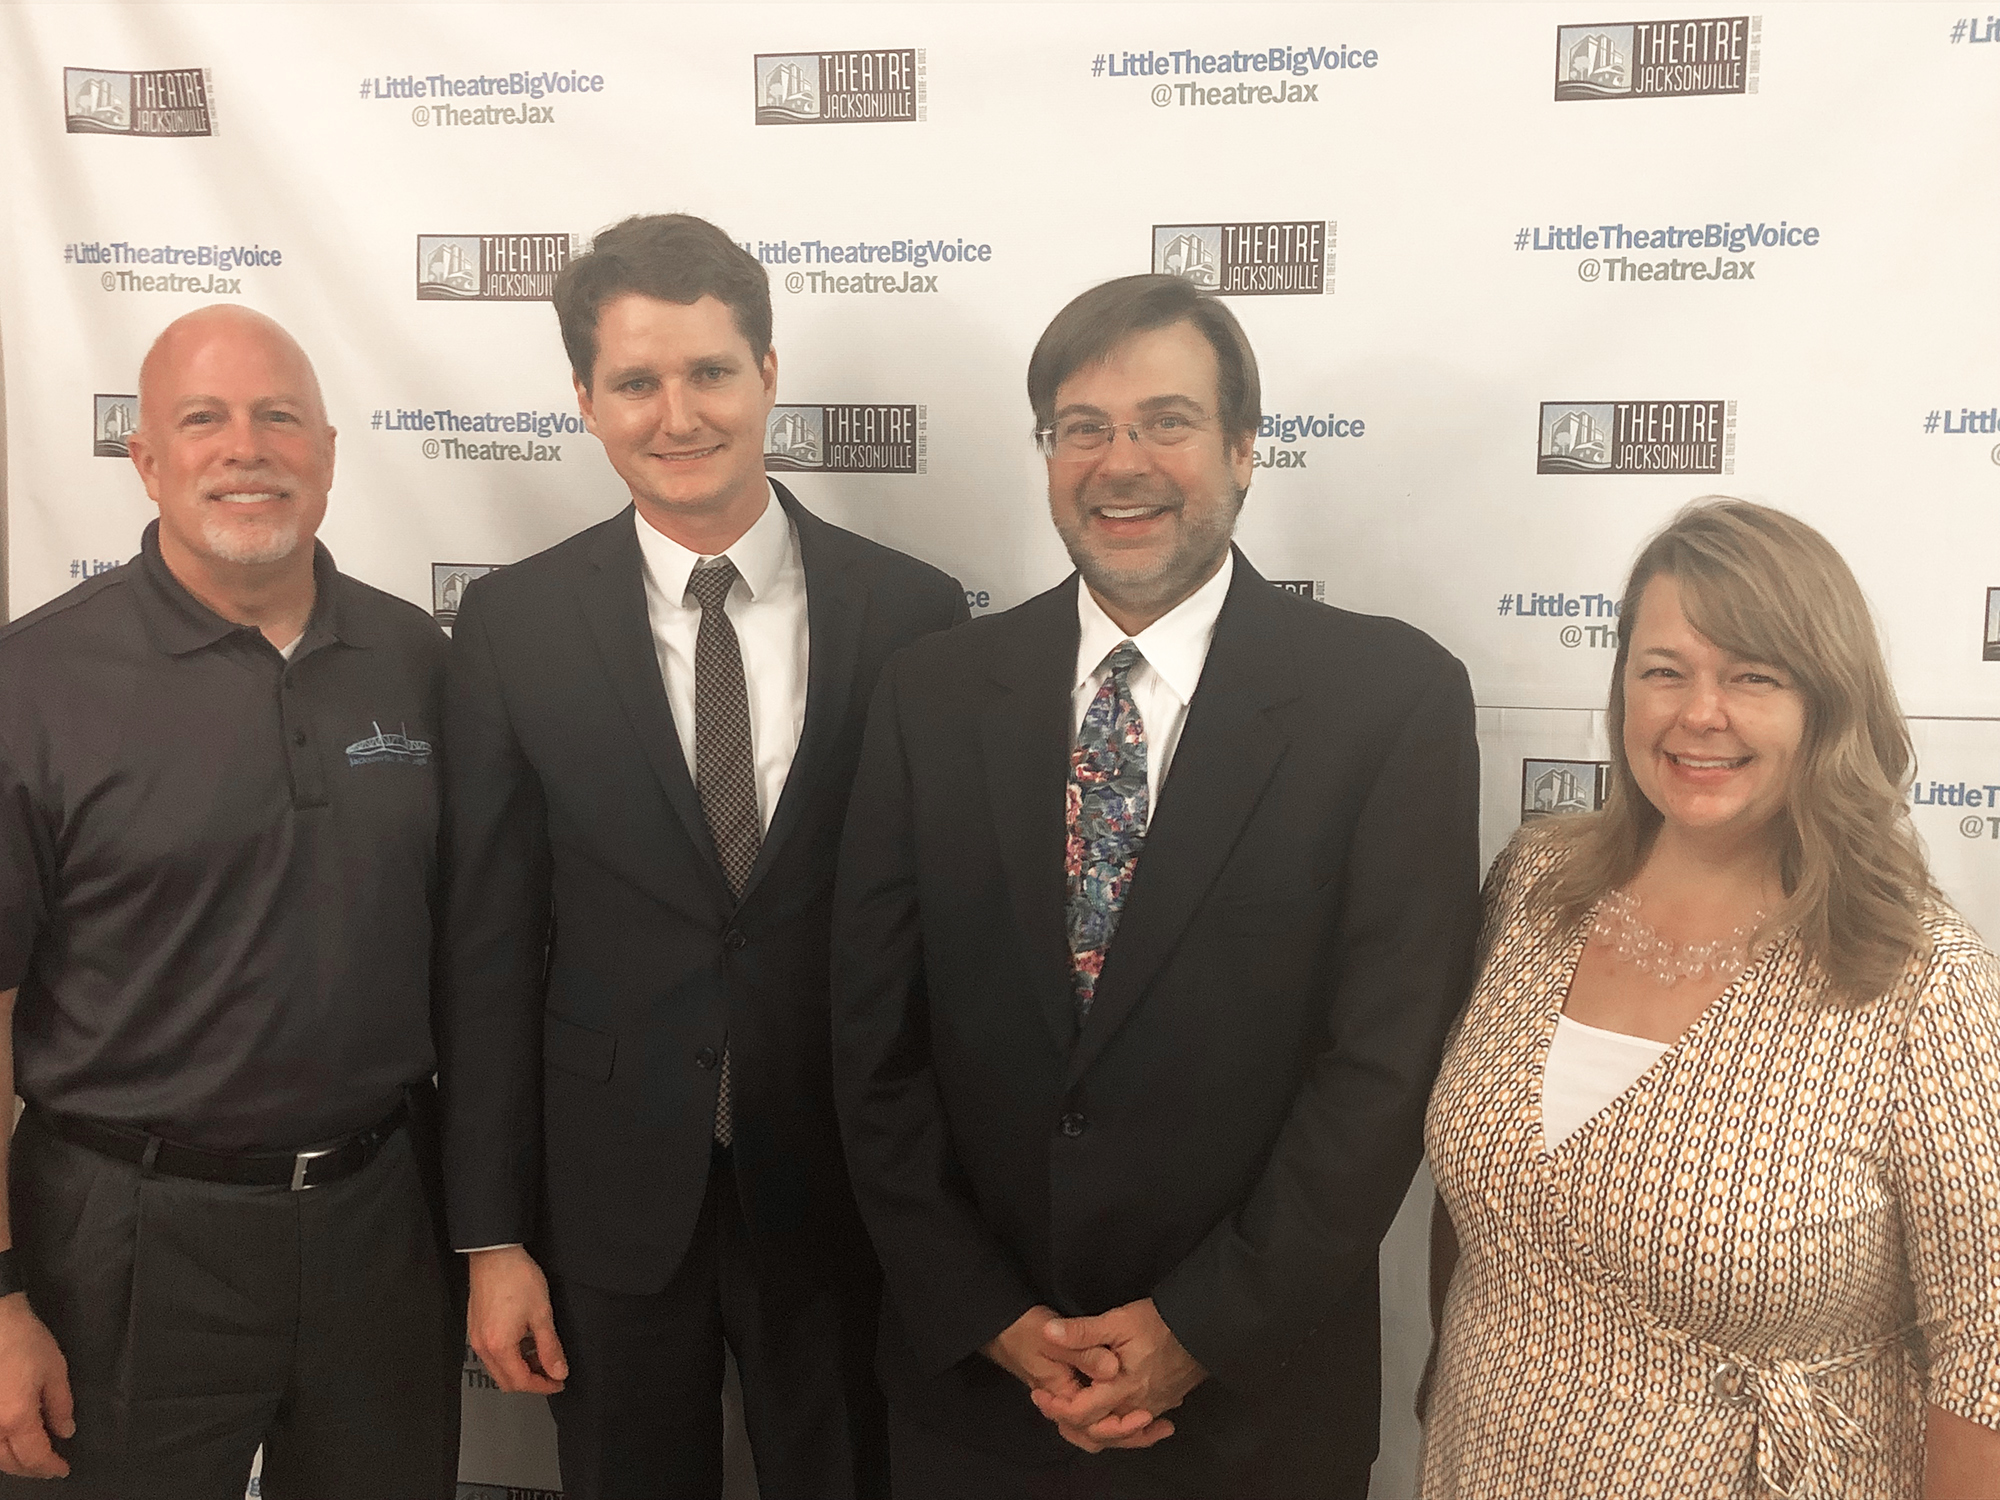 From left, Jacksonville Area Legal Aid CEO and President Jim Kowalski, attorneys James Poindexter and Tad Delegal and JALA Pro Bono Director Missy Davenport at the premiere of “Twelve Angry Men” at Theatre Jacksonville.